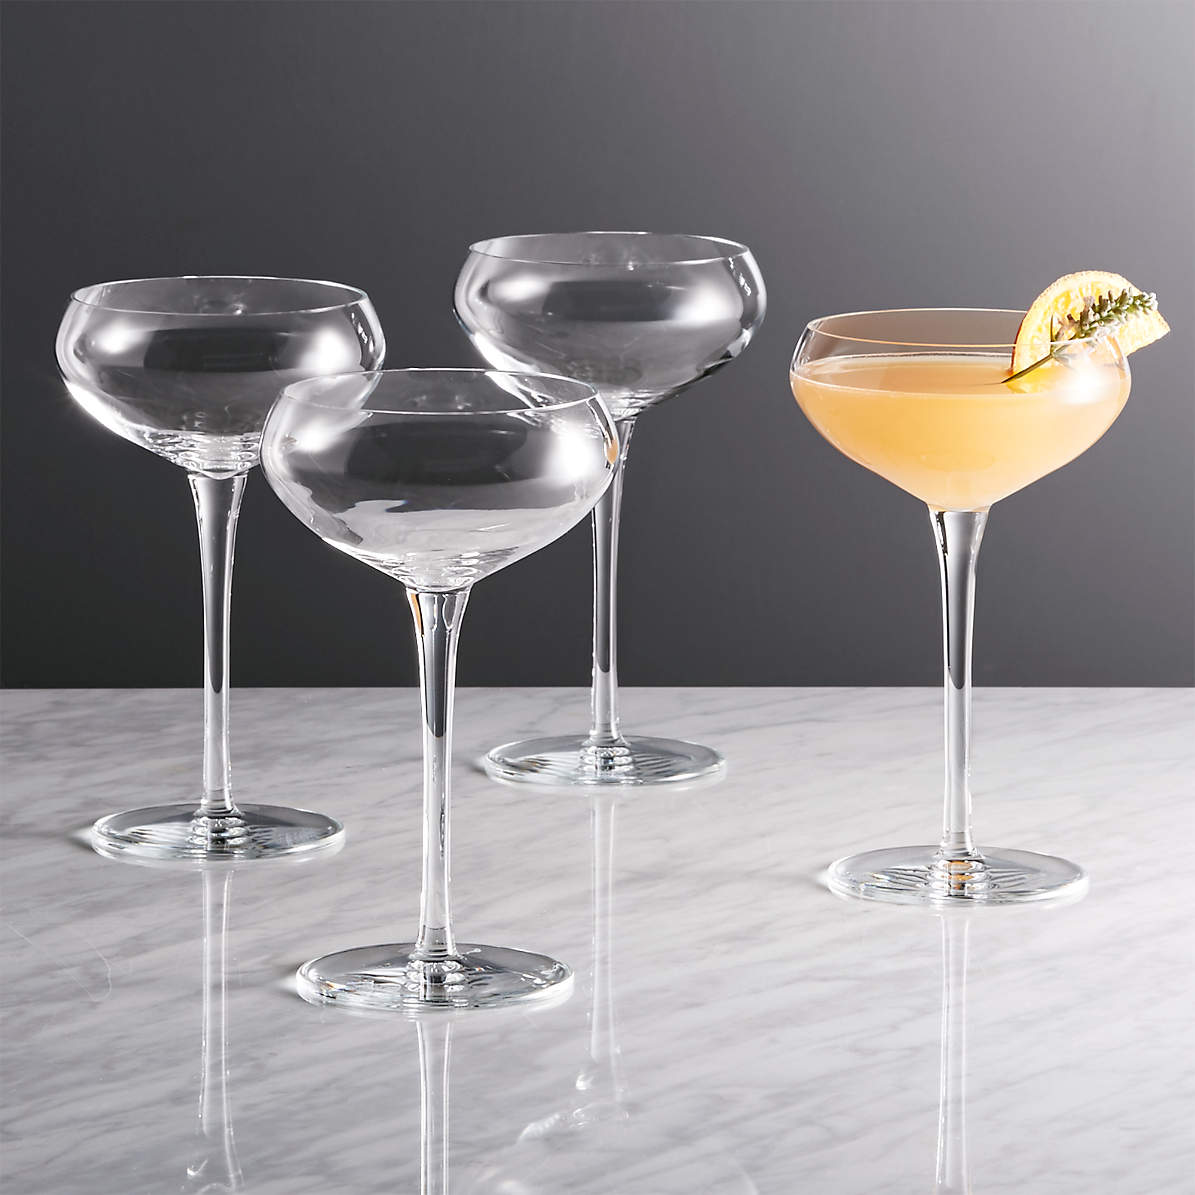 Libbey Signature Kentfield Coupe Cocktail Glasses (Set of 4)